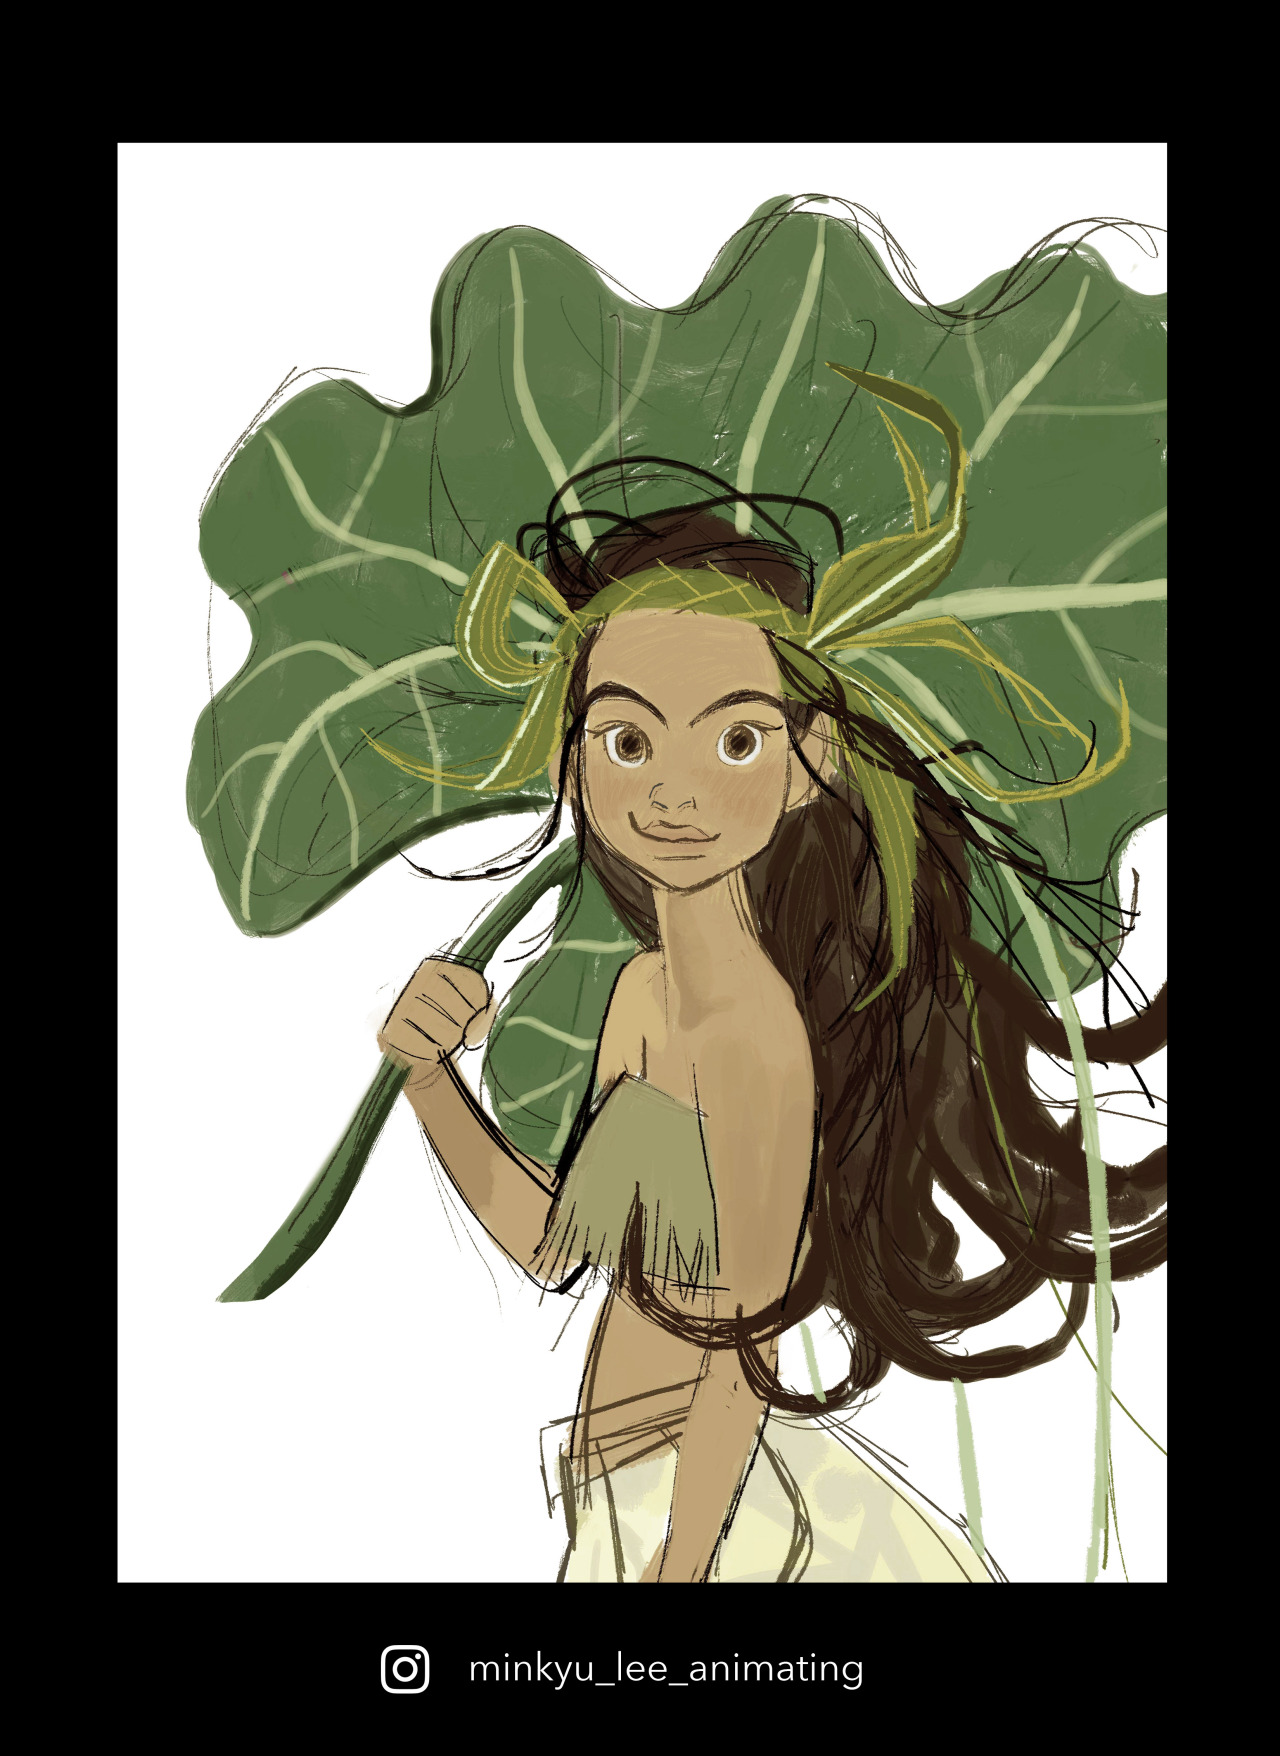 minkyuanim: Moana Visual Development, Part 1. Here are some of the very first drawings